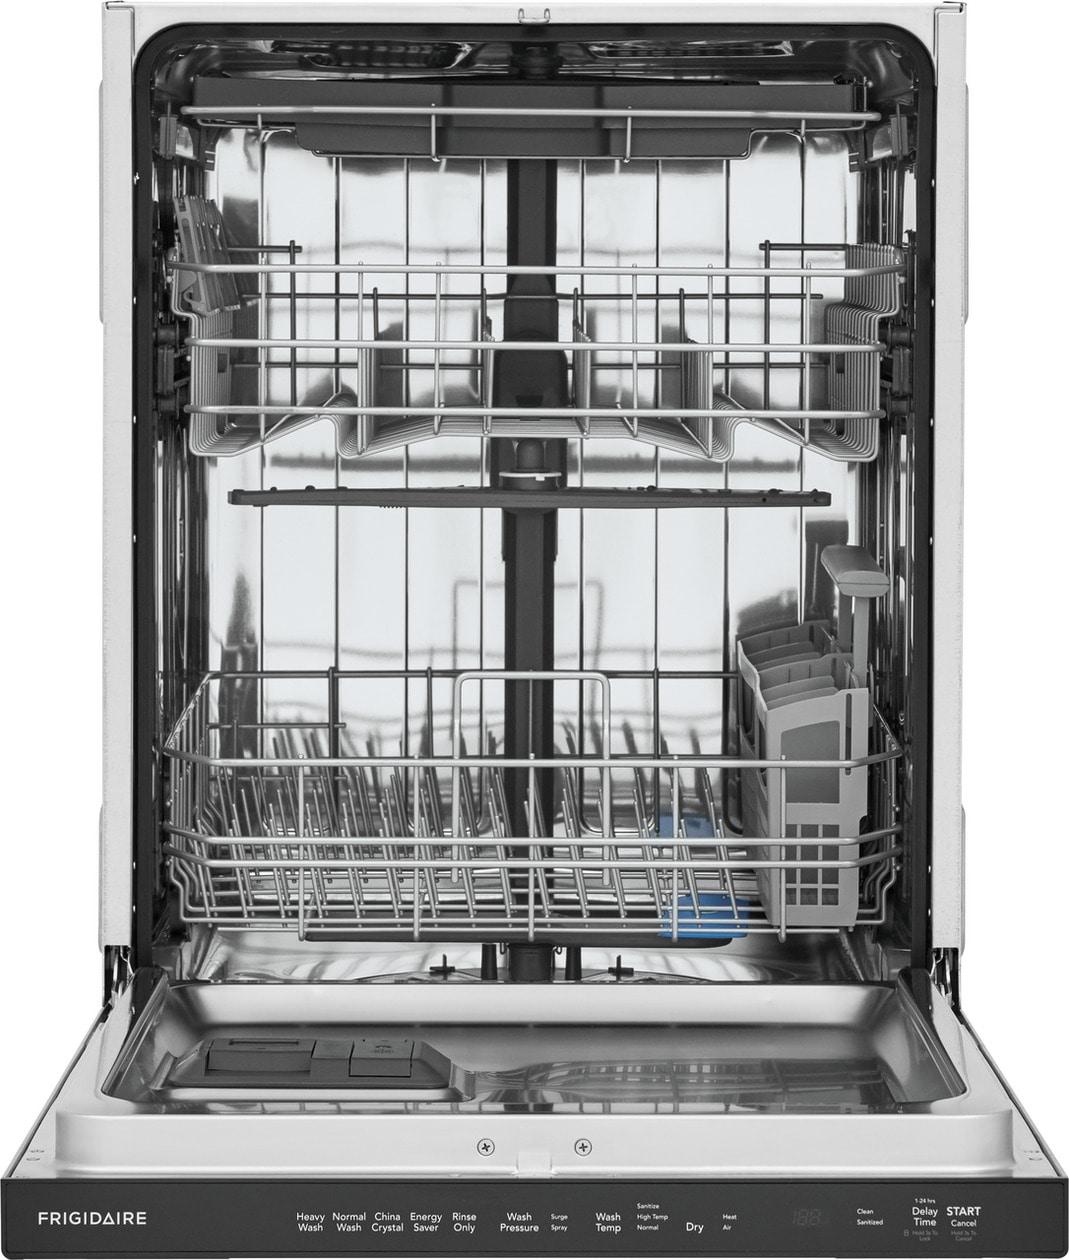 Frigidaire 24" Stainless Steel Tub Built-In Dishwasher